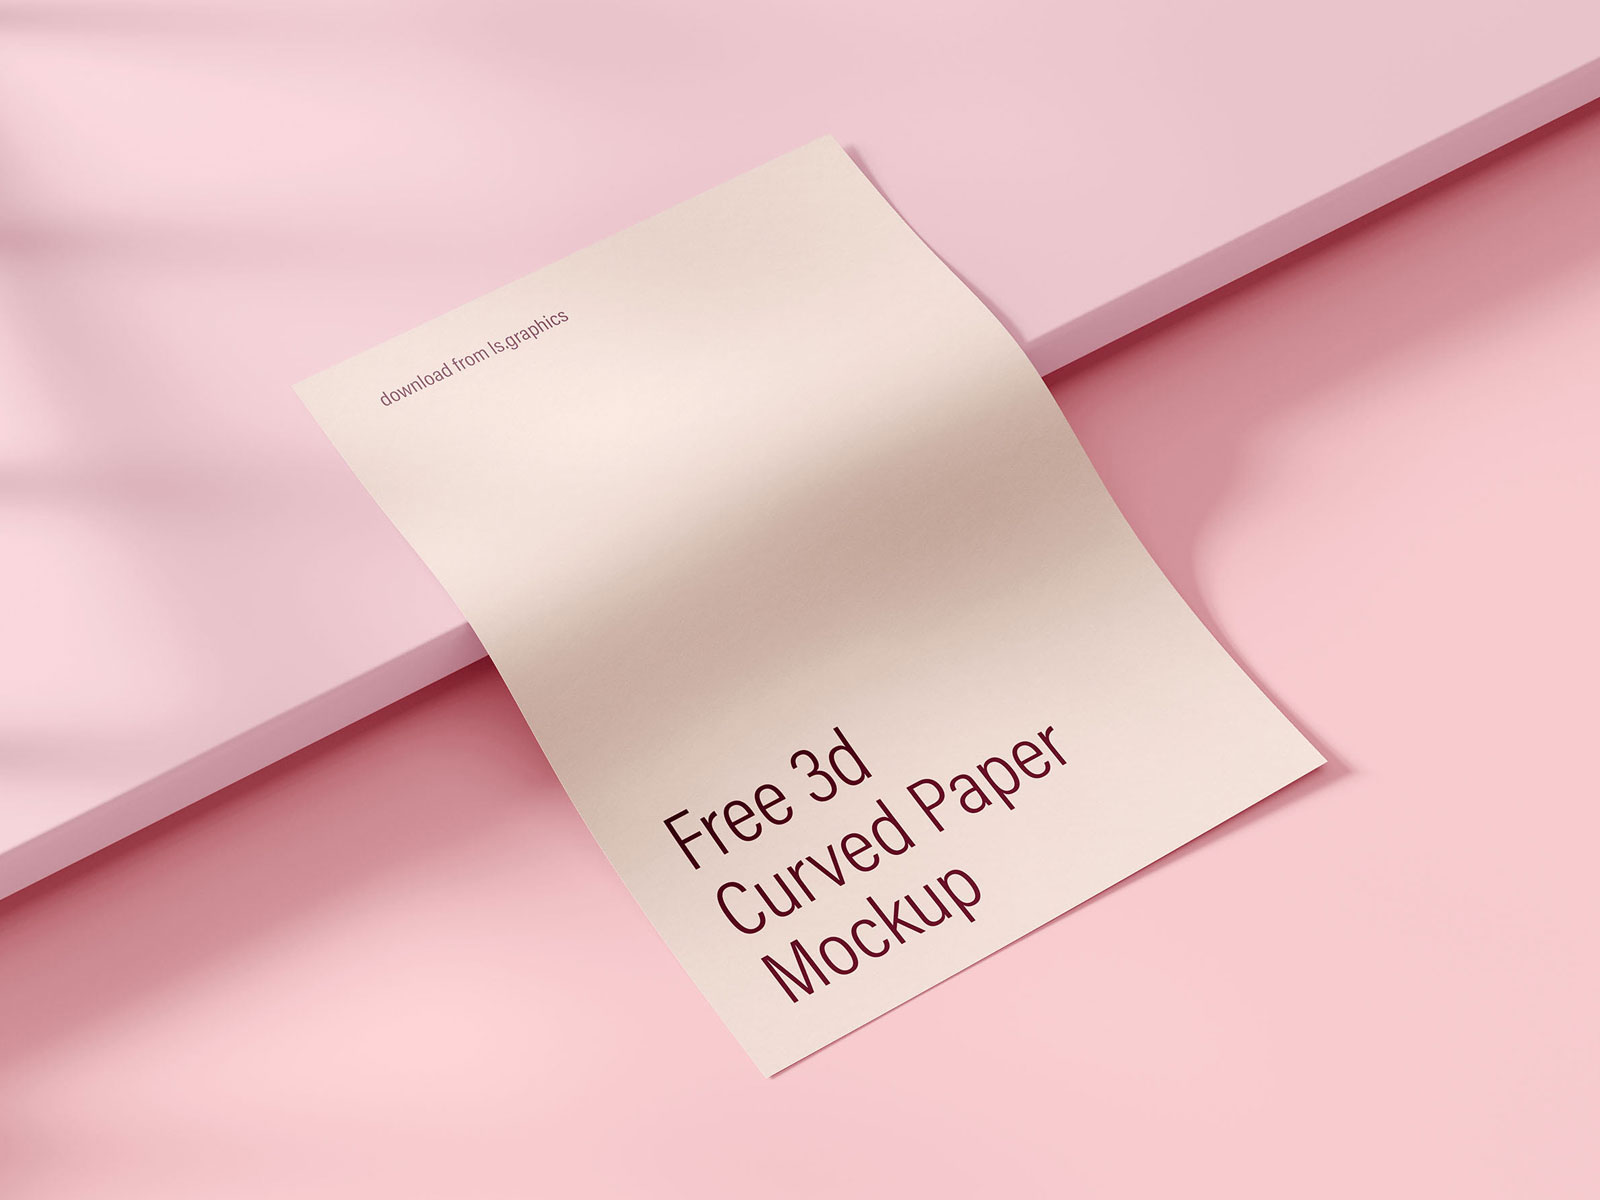 3D Curved Paper PSD Mockup